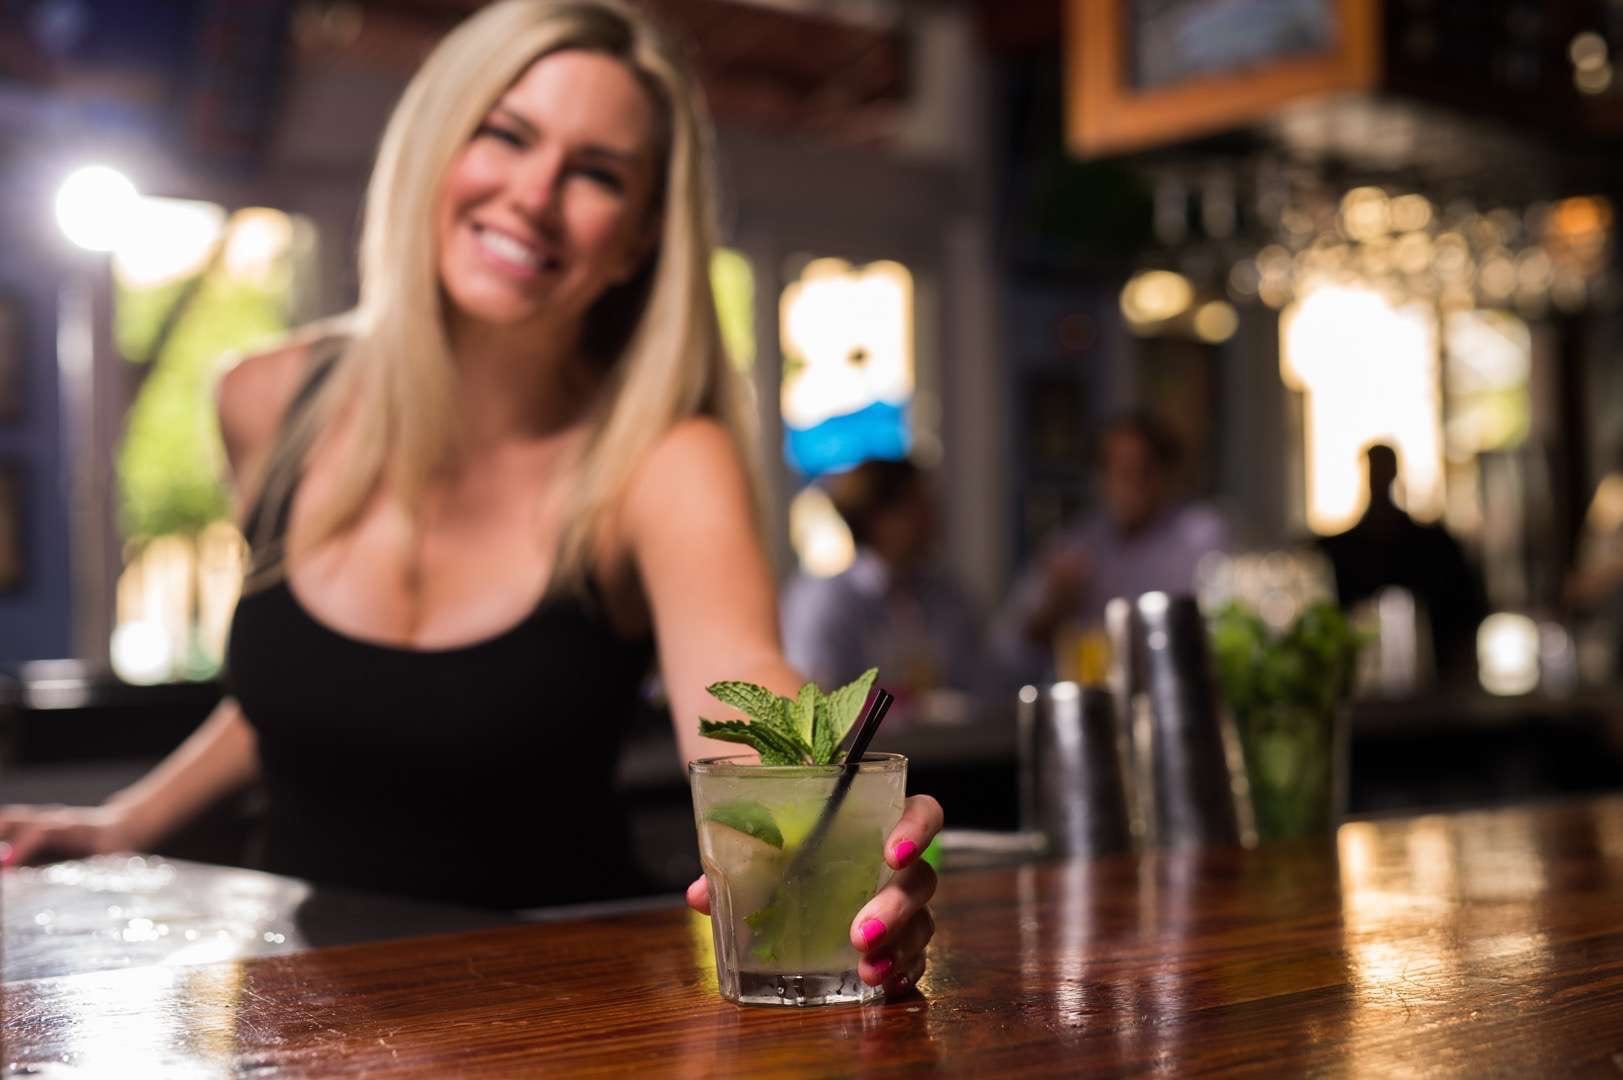 IU C&I Studios Portfolio The Restaurant People Woman with short blond hair in a black crop top smiling and posing with an alcoholic beverage with mint leaves